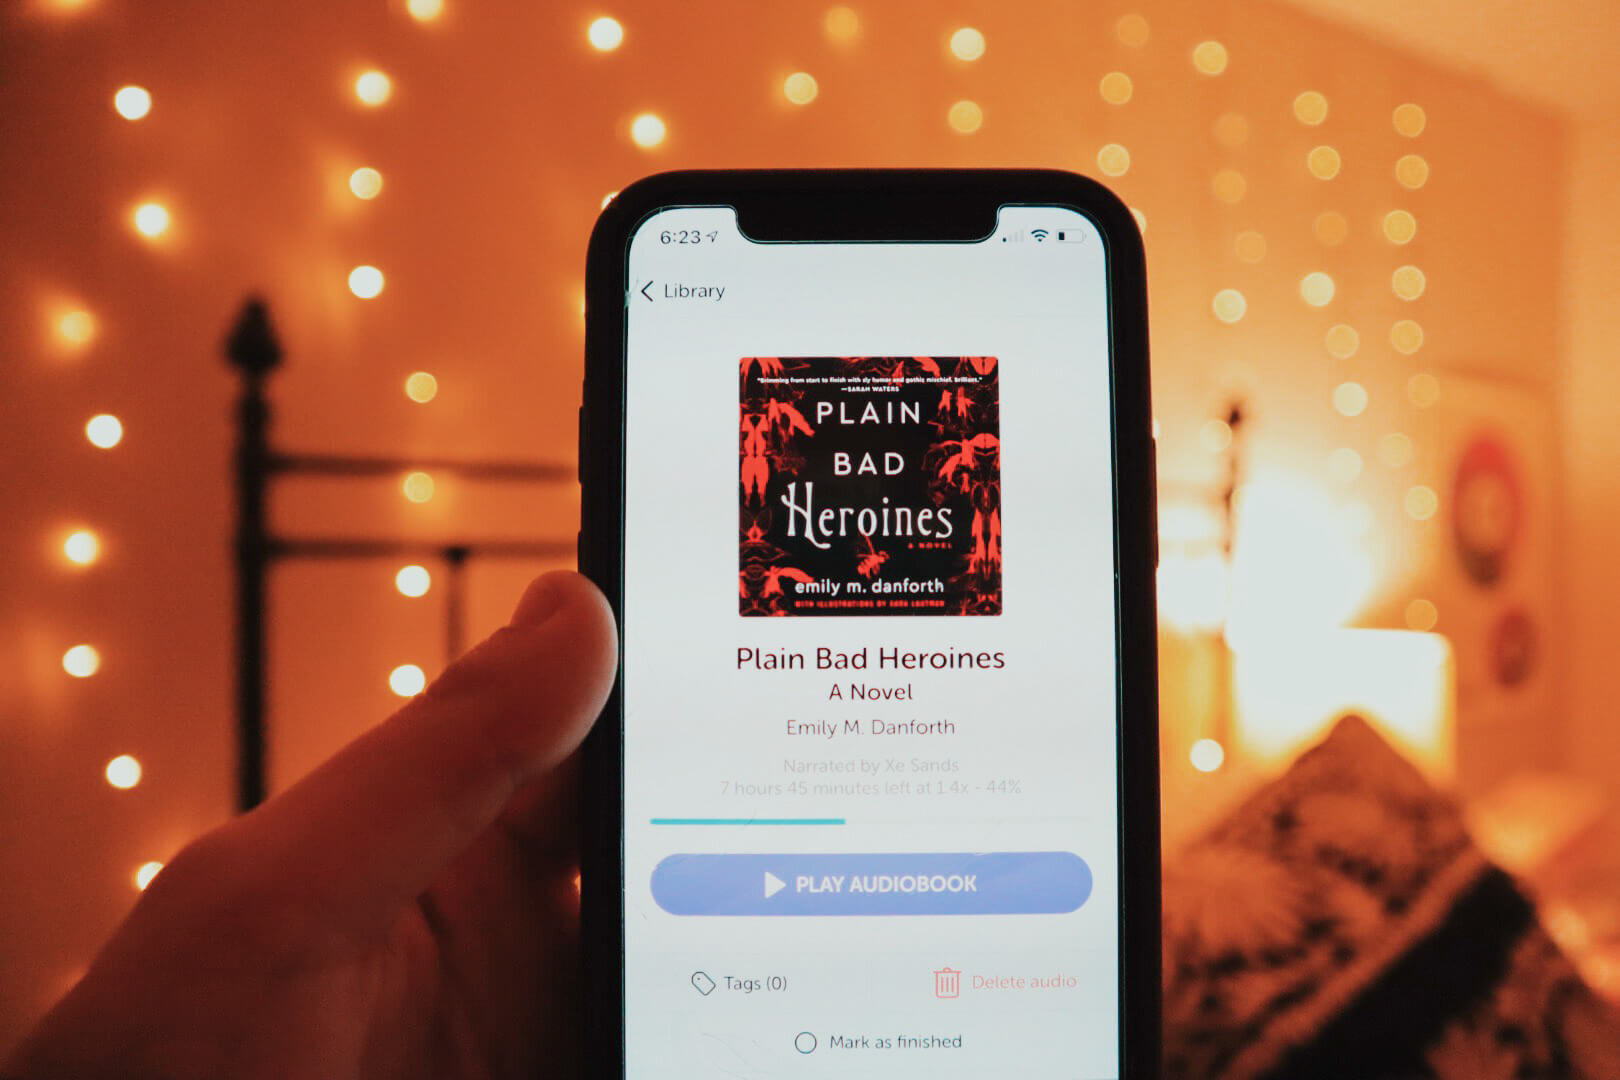 The book Plain Bad Heroines by Emily M. Danforth is featured on an iPhone within the Libro.fm audiobook app. The phone is held up against a warm bedroom background with bokeh lights.